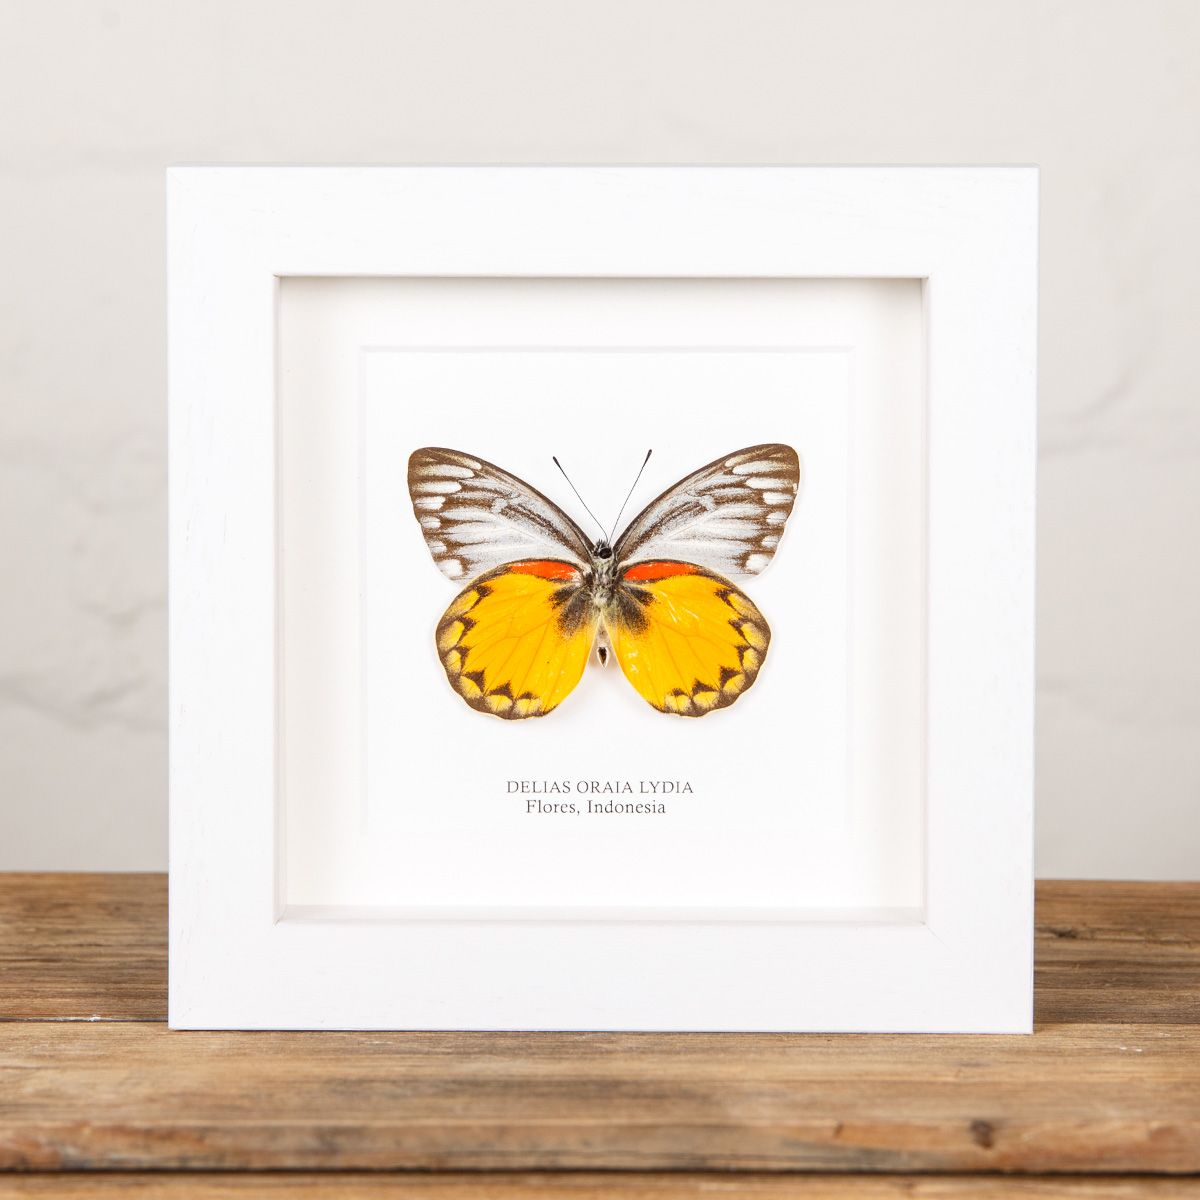 Delias Butterfly (Delias oraia lydia) in Box Frame from Flores, Indonesia